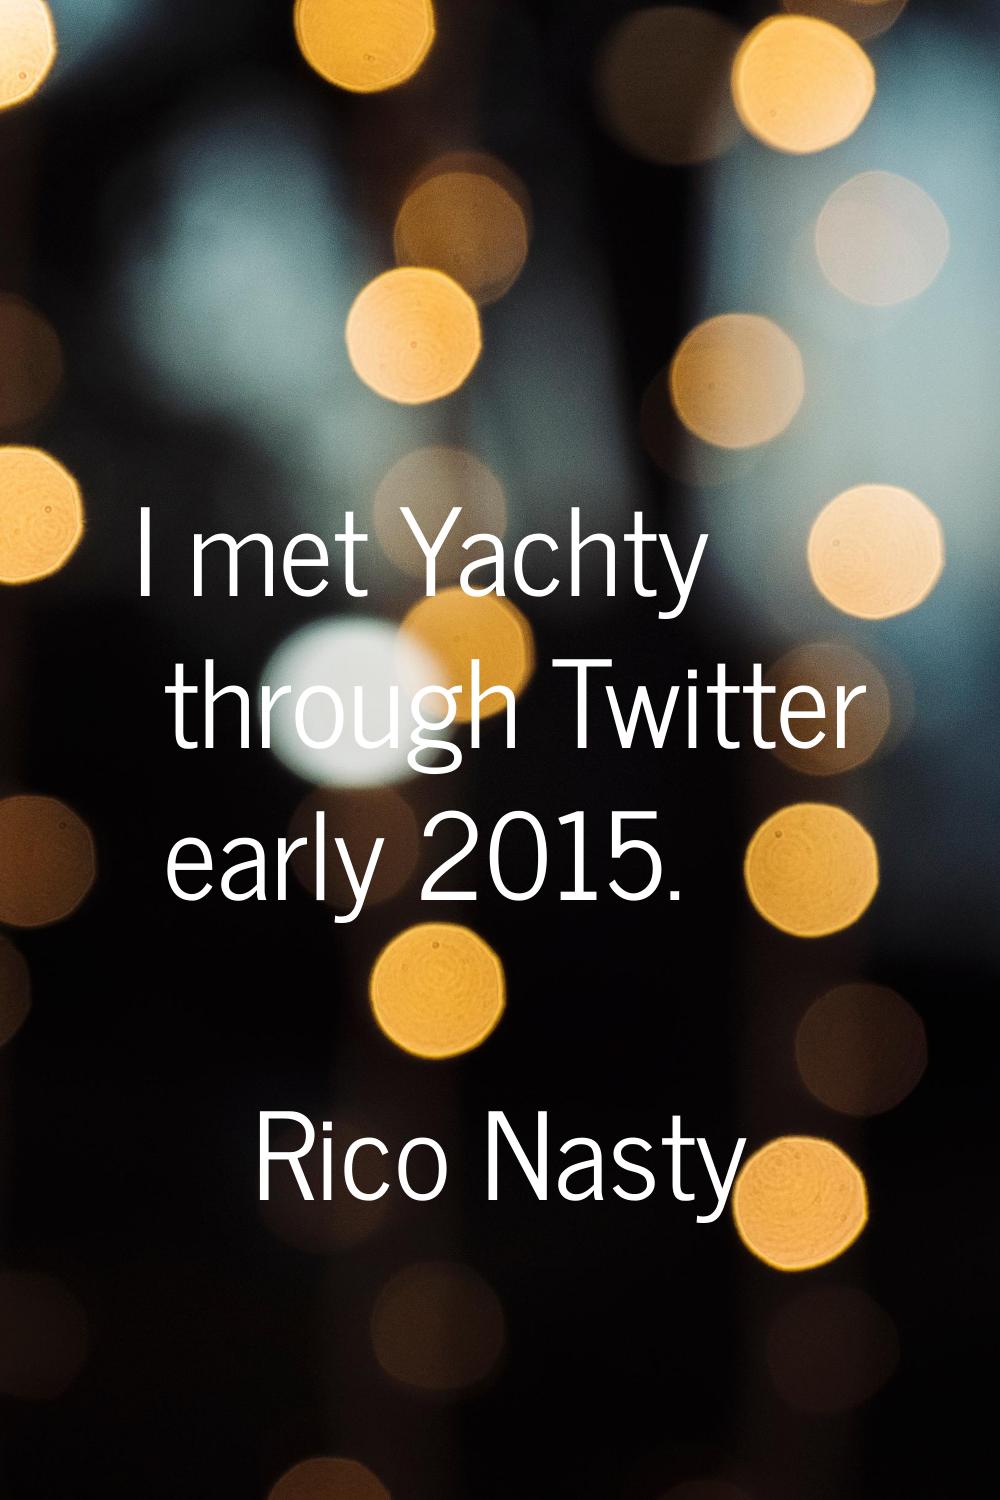 I met Yachty through Twitter early 2015.